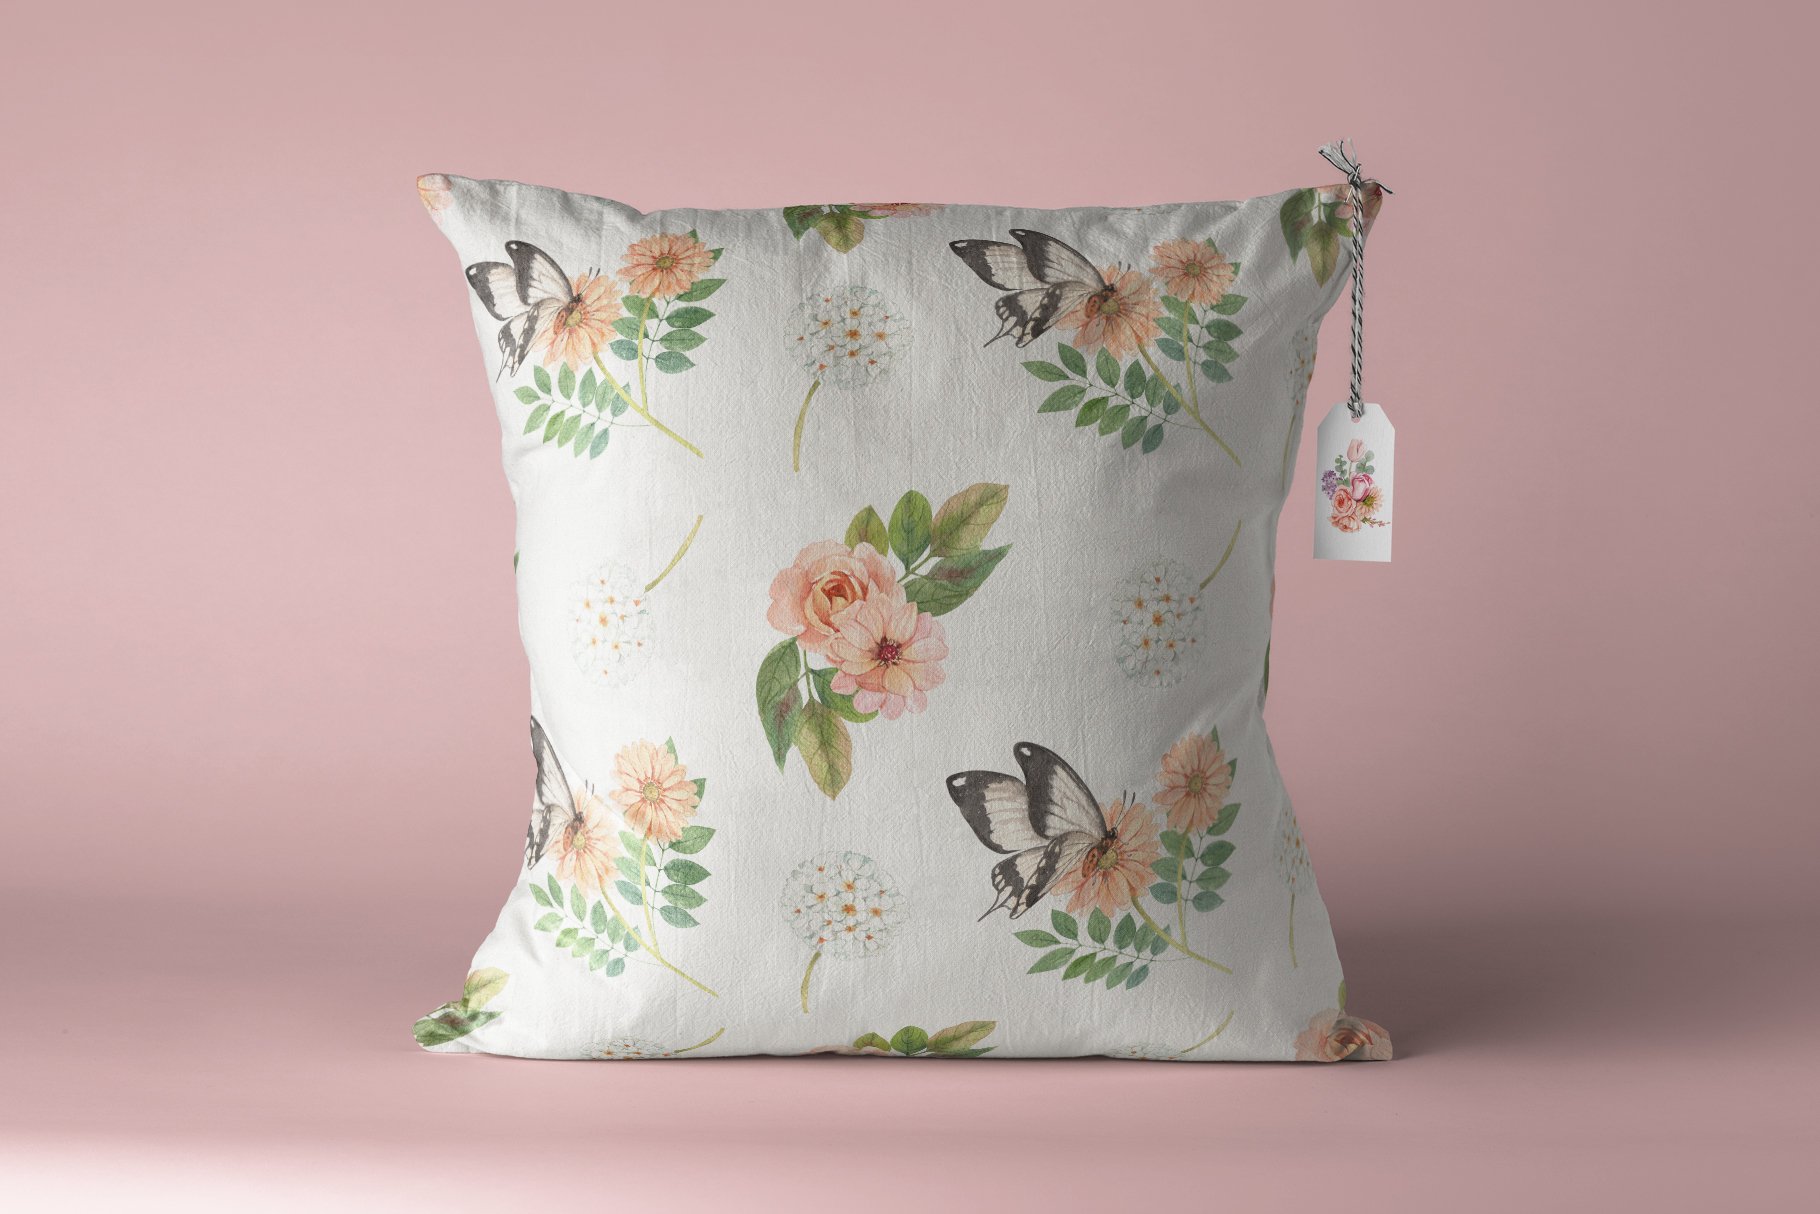 Delicate pillow with the orange butterfly illustration.